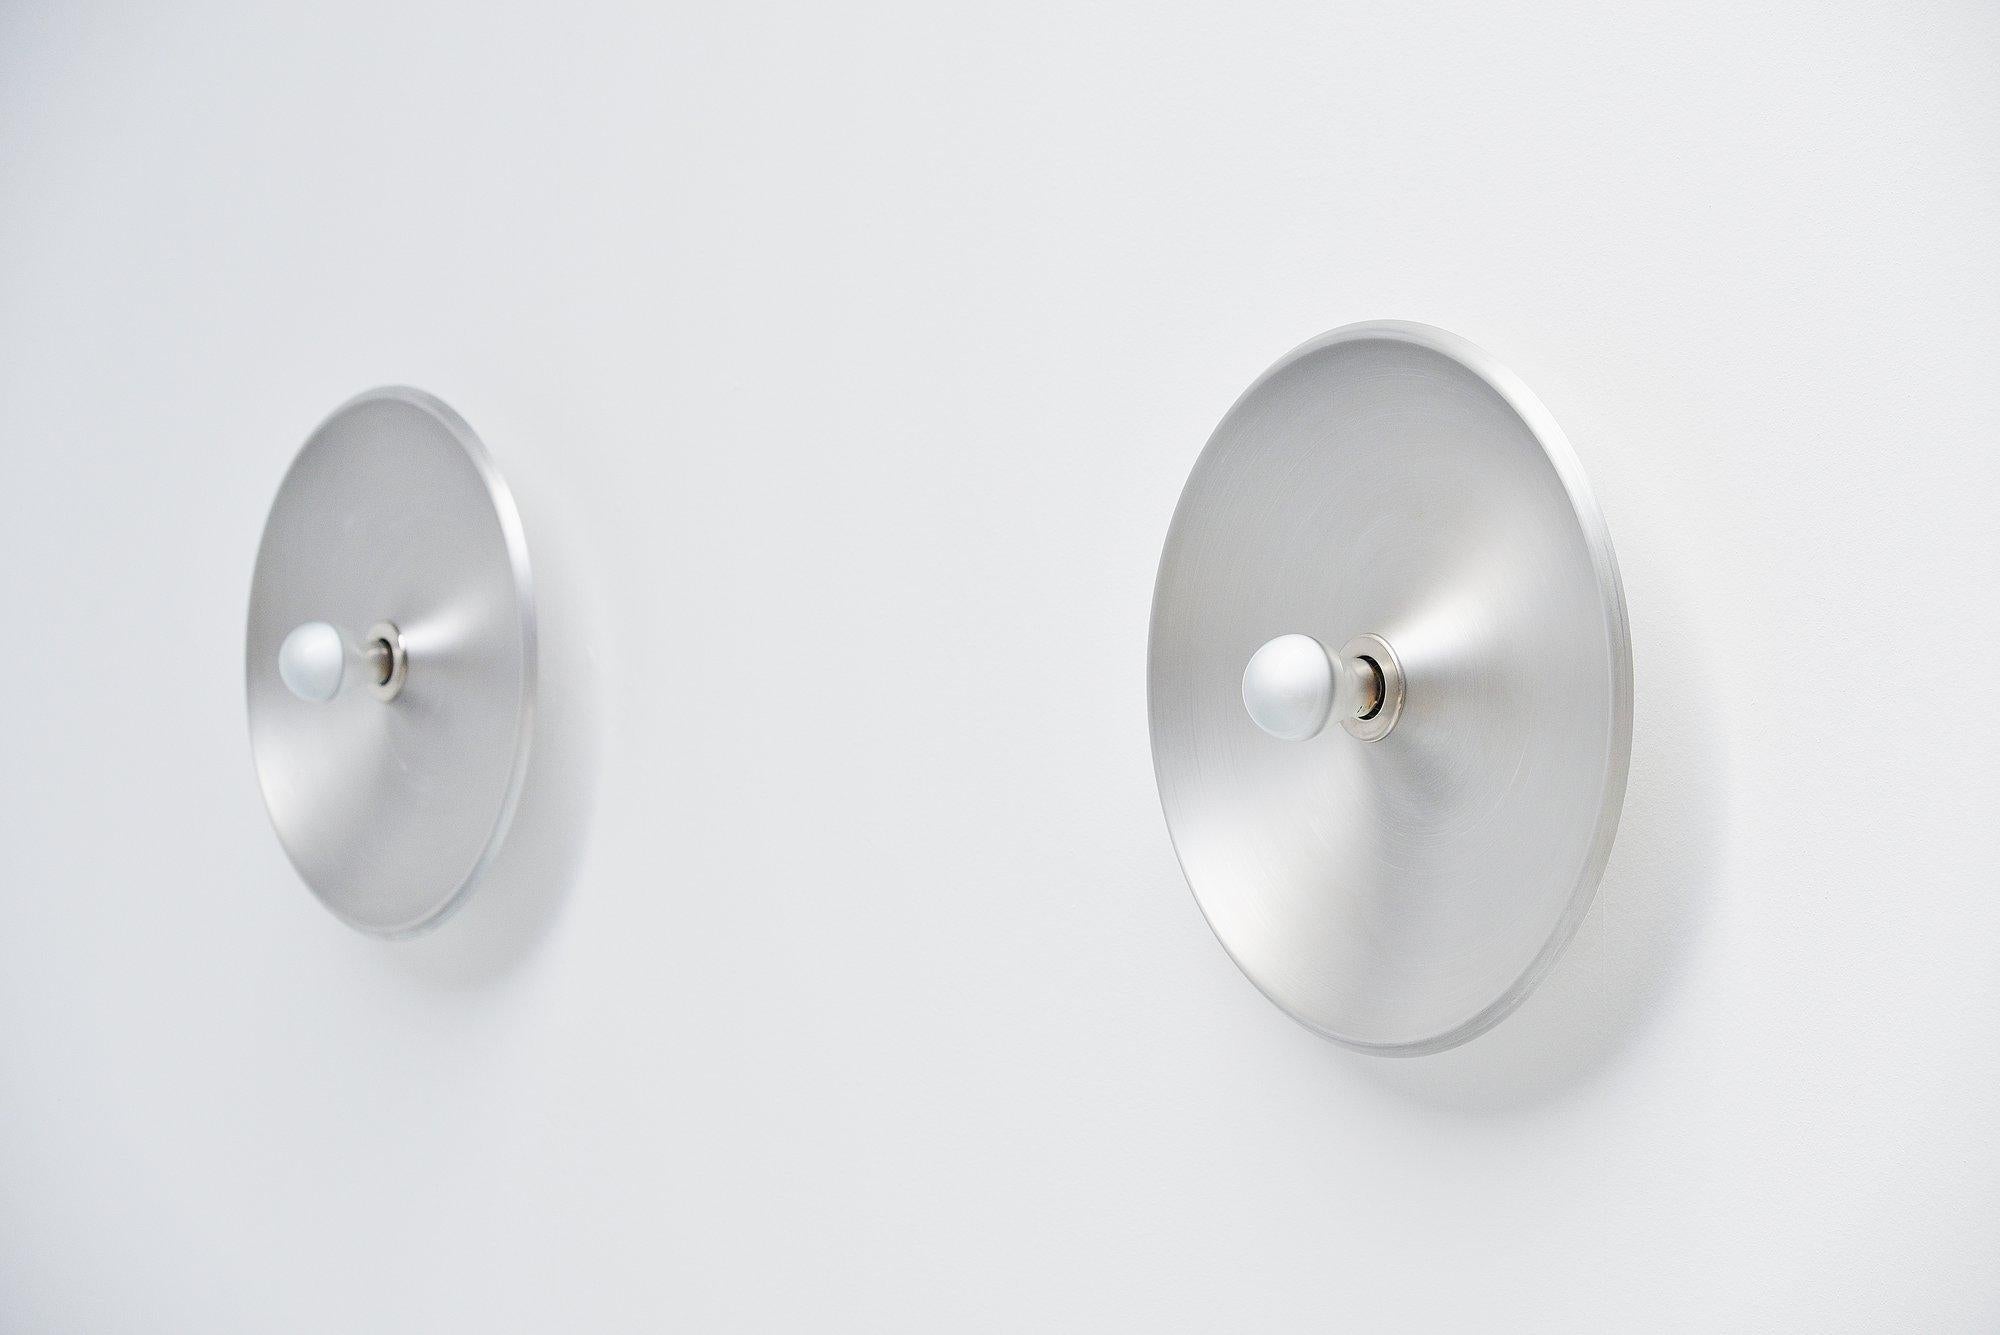 Gino Sarfatti Wall Lamps Model 262 Arteluce, Italy, 1971 In Good Condition For Sale In Roosendaal, Noord Brabant